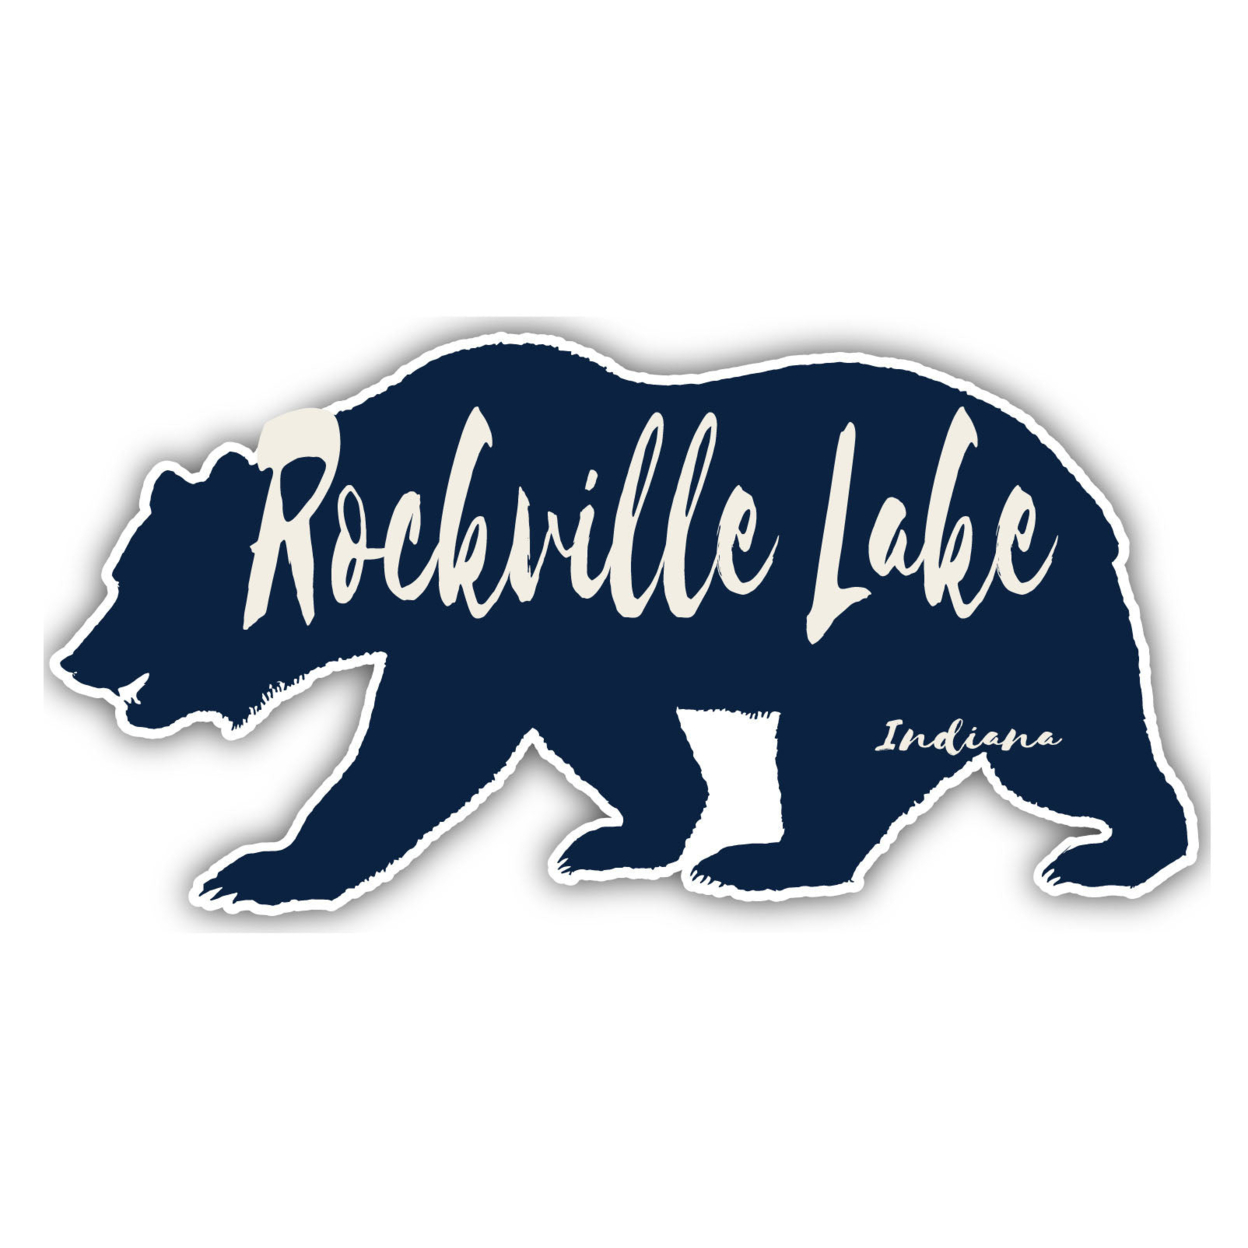 Rockville Lake Indiana Souvenir Decorative Stickers (Choose Theme And Size) - Single Unit, 2-Inch, Great Outdoors